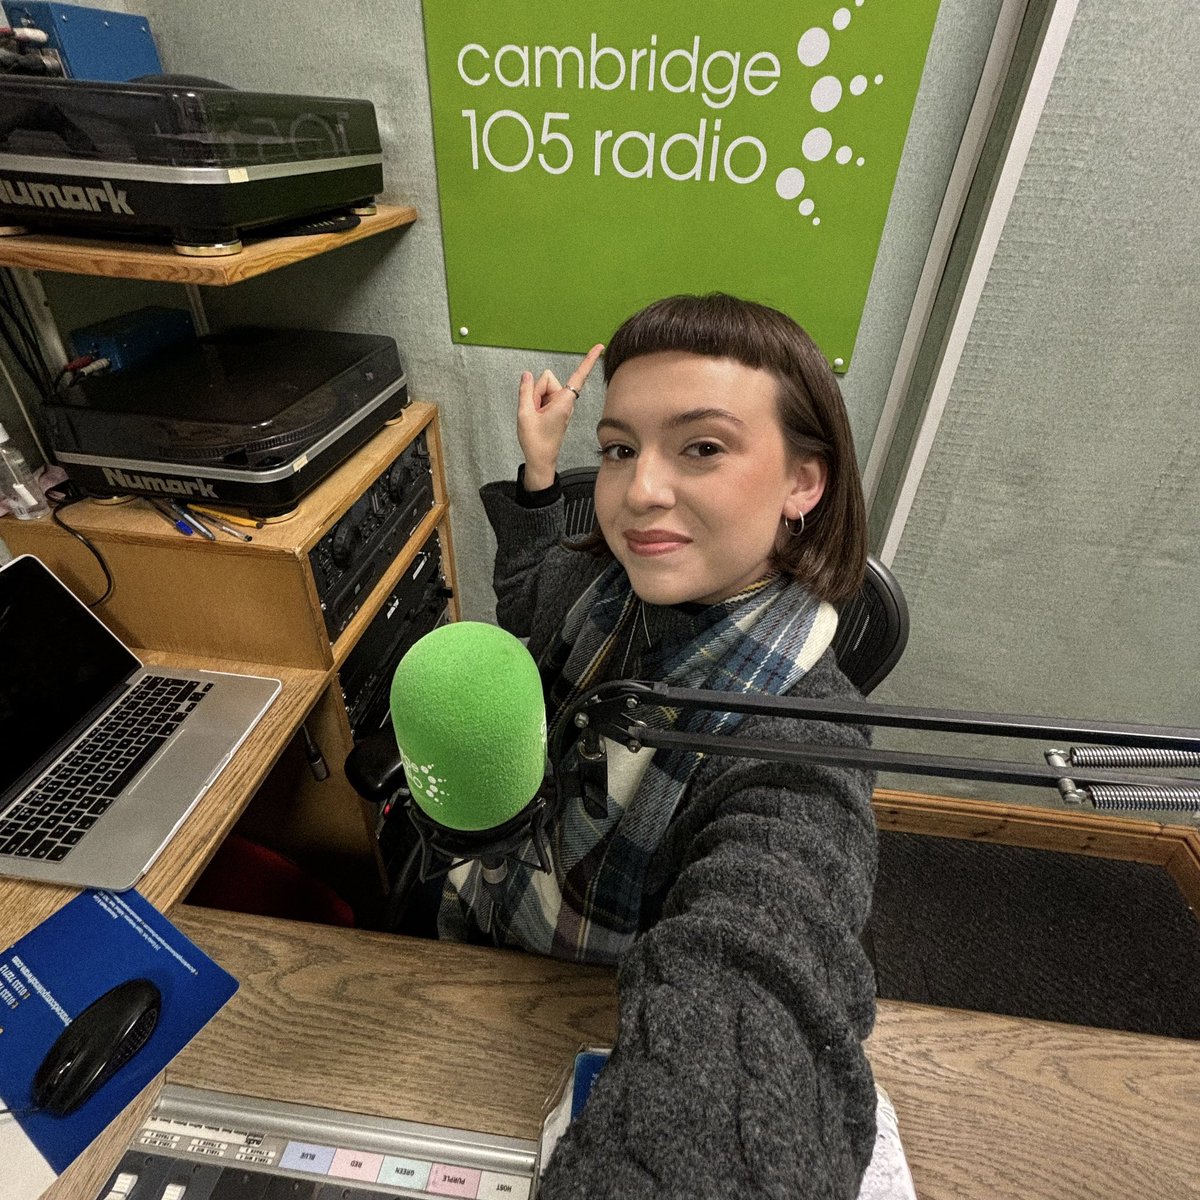 currently live on @cambridge105 presenting The New Music Generator 💥 the best new music from artists across East Anglia 🫶🏻🫶🏻🫶🏻 here until 9; cambridge105.co.uk/radioplayer/